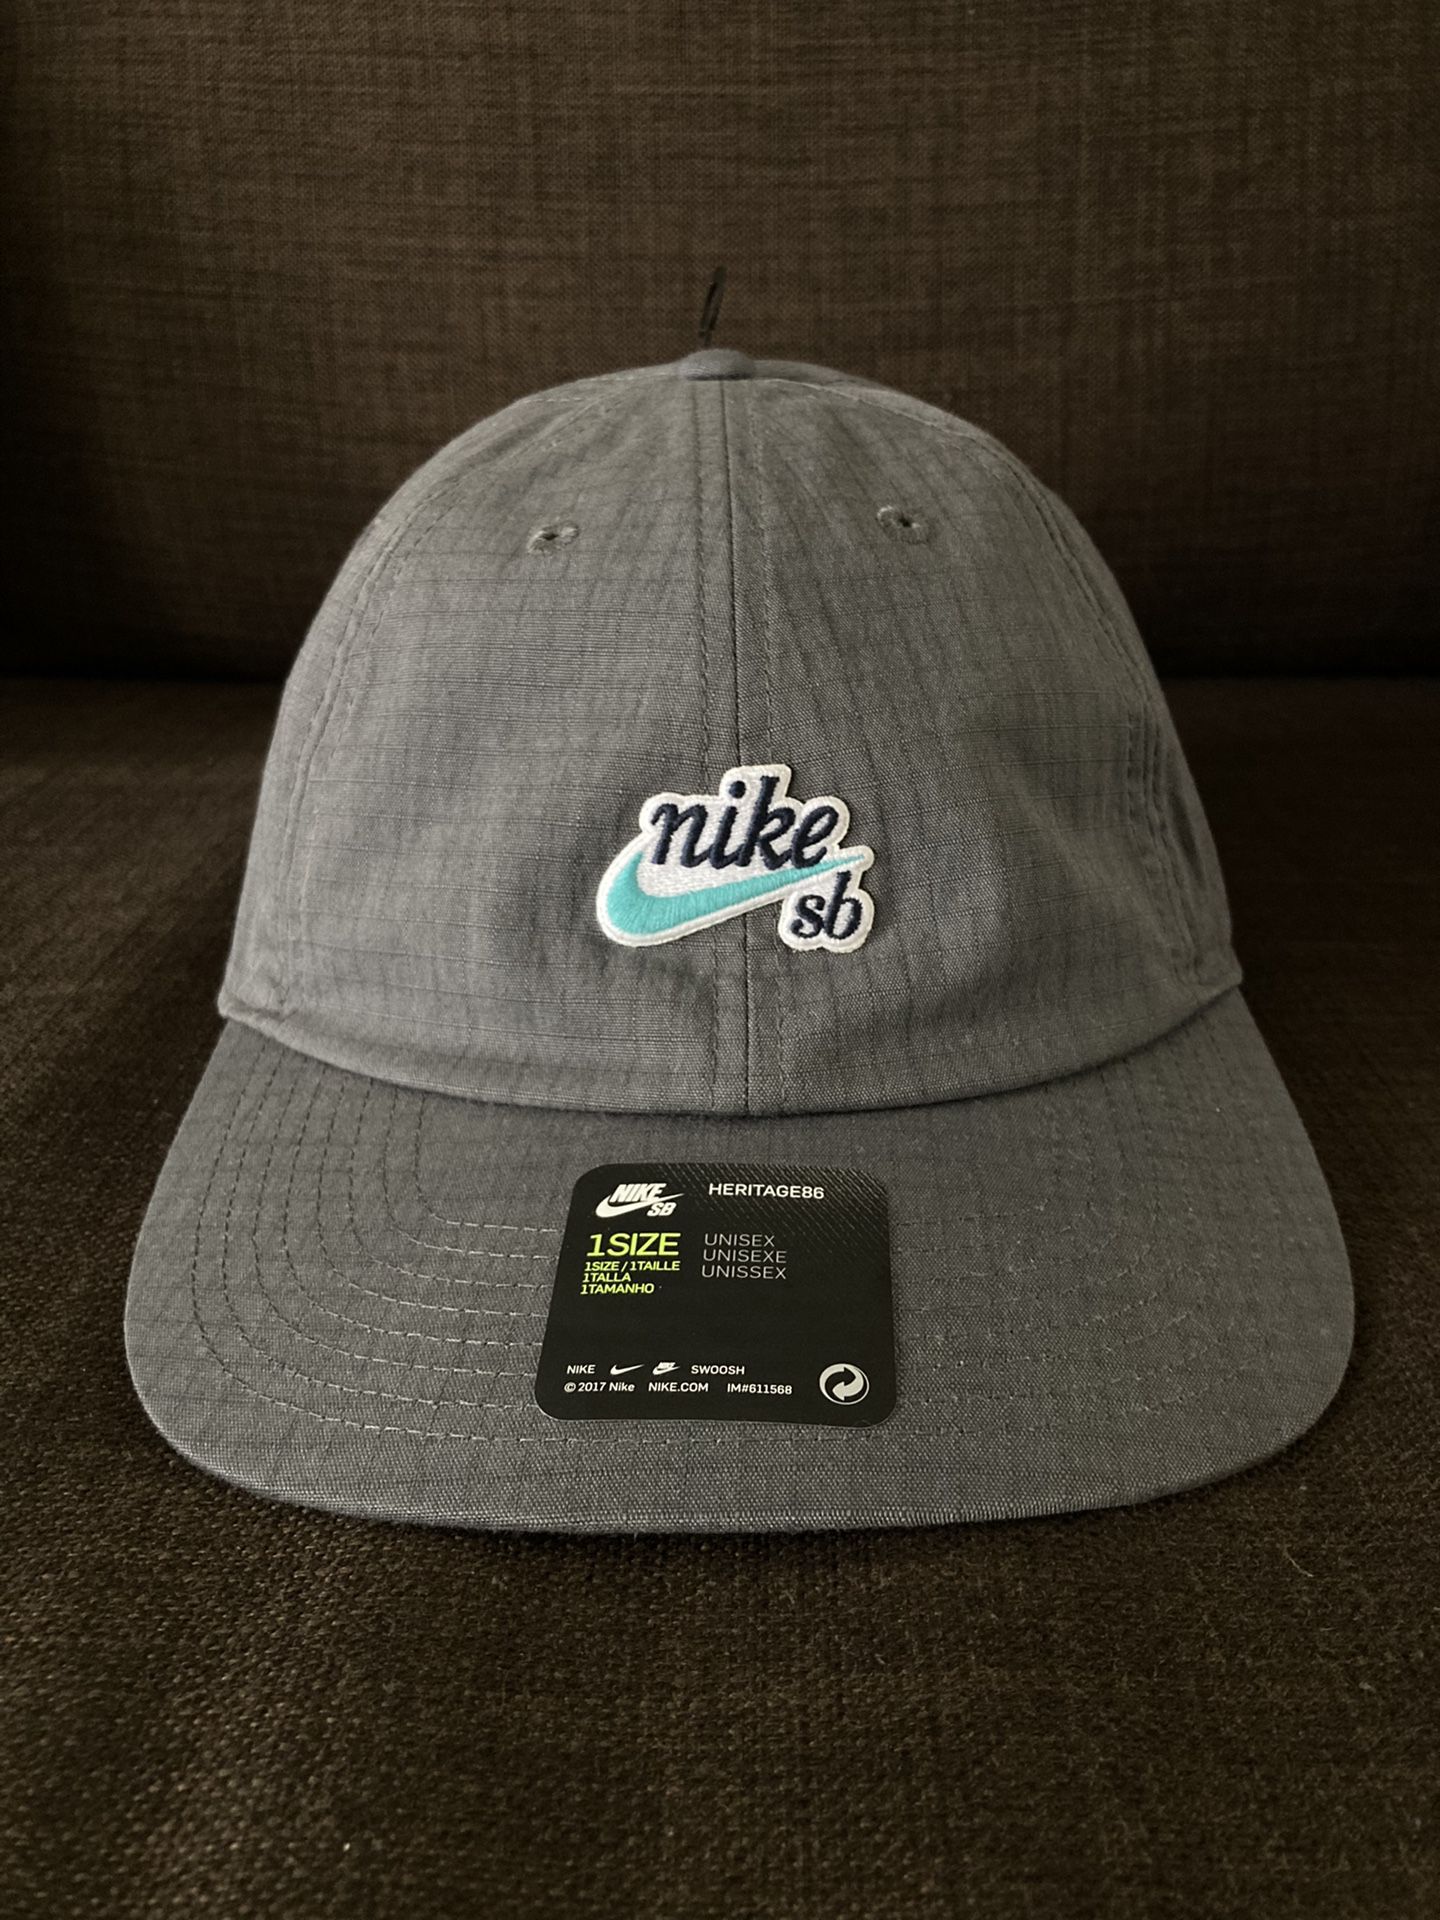 Nike SB Strap back Dri-Fit Hat for Sale Los Angeles, CA - OfferUp